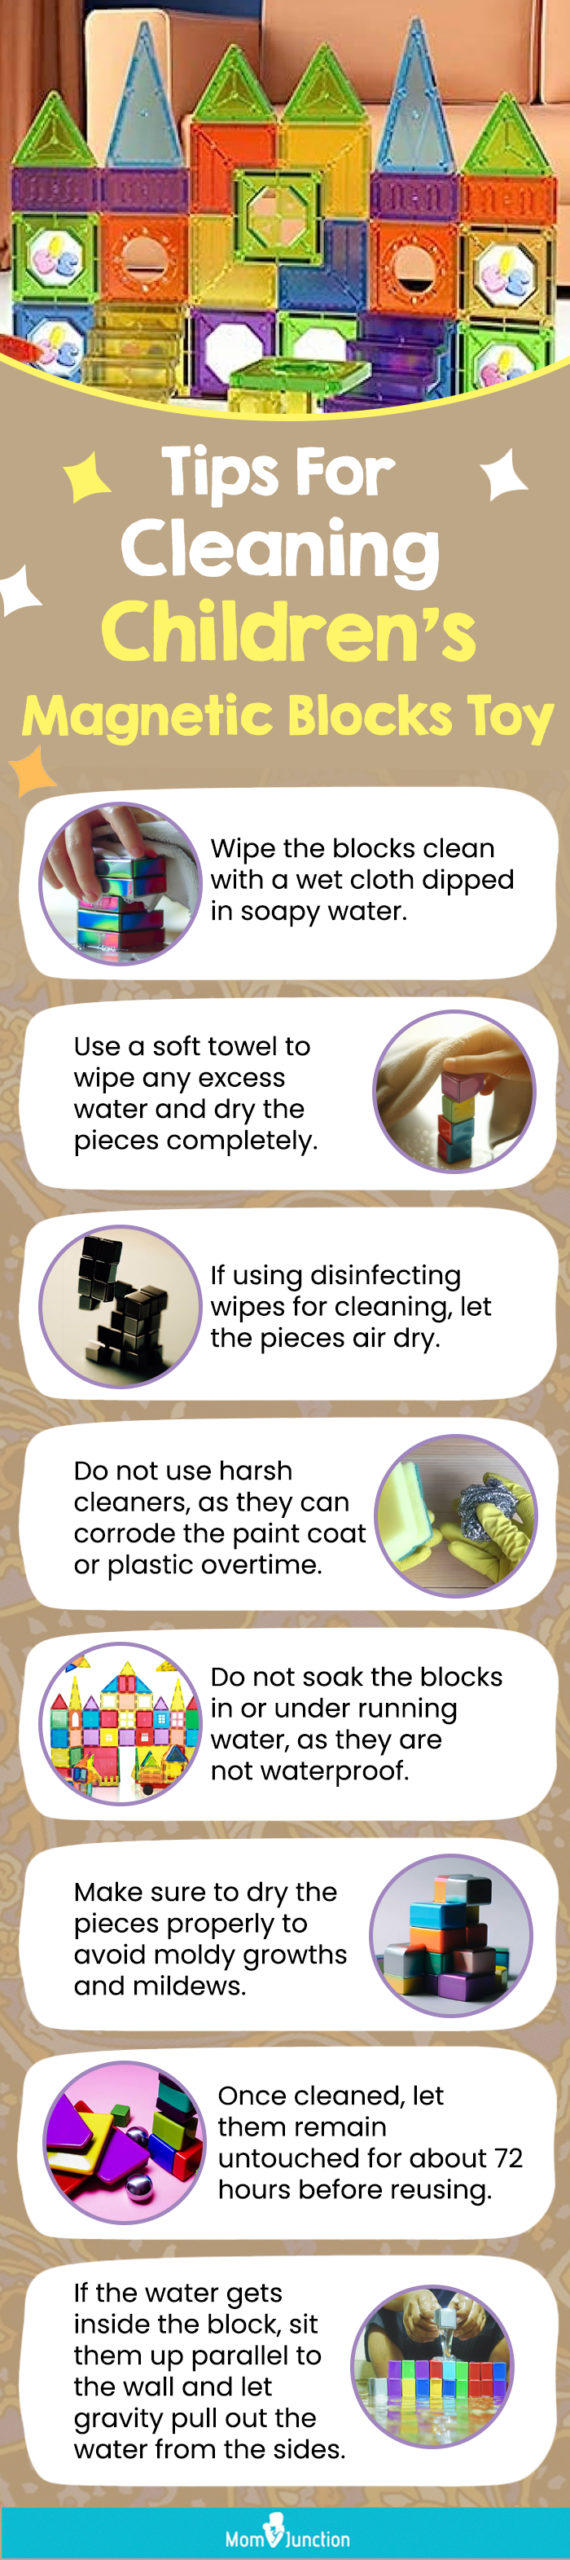 Tips For Cleaning Children’s Magnetic Blocks Toy (infographic)